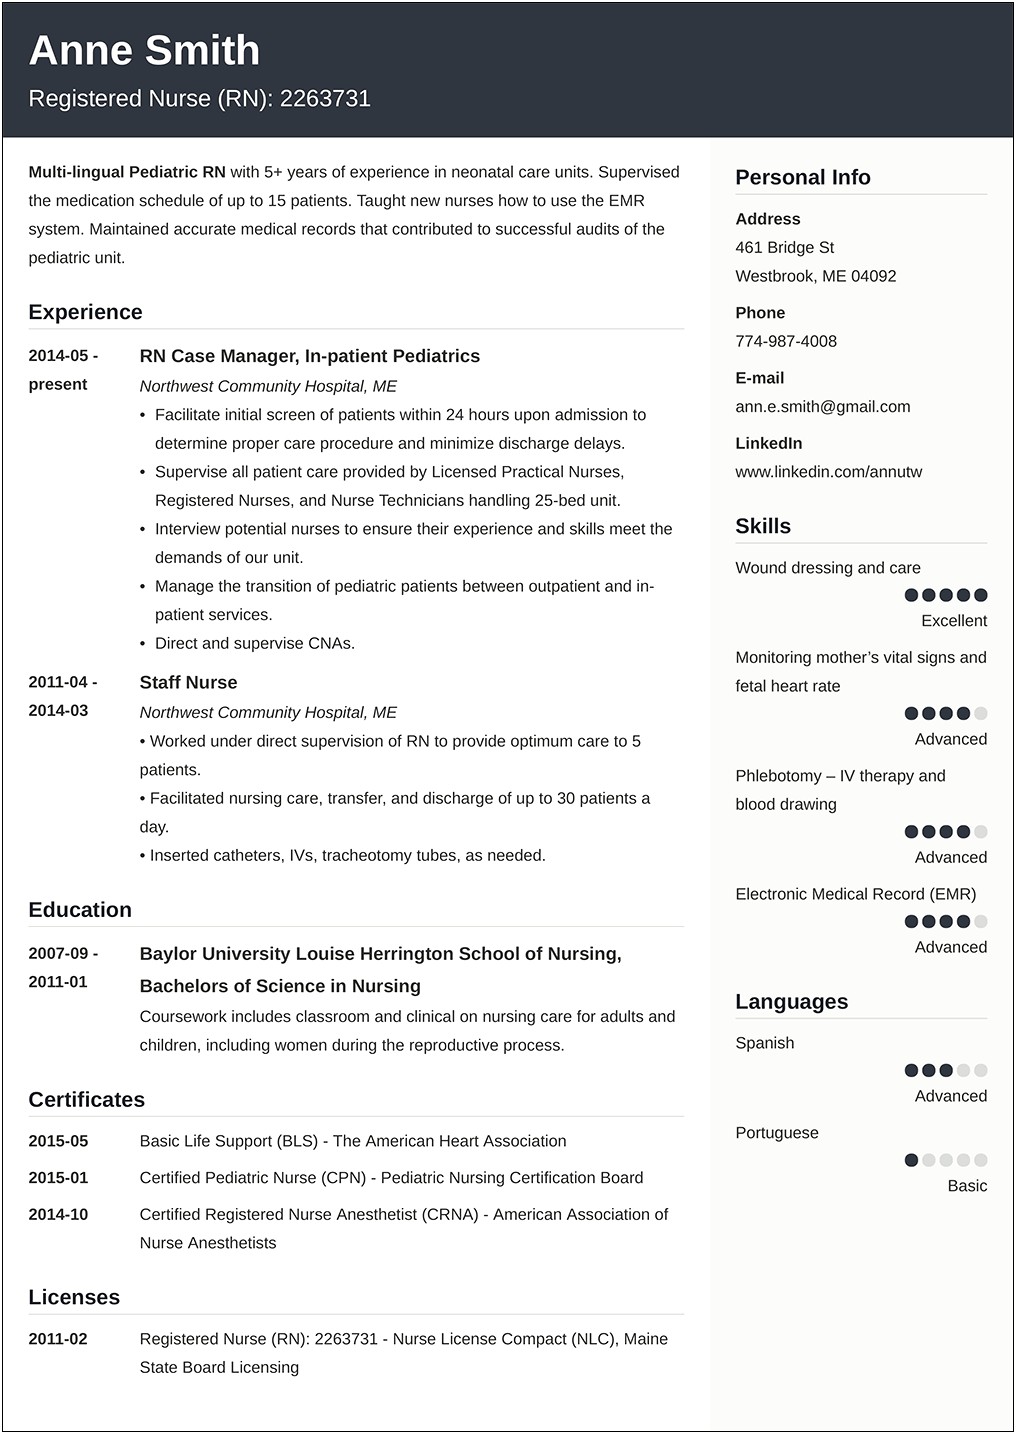 Examples Of Good Job Profiles For Resume